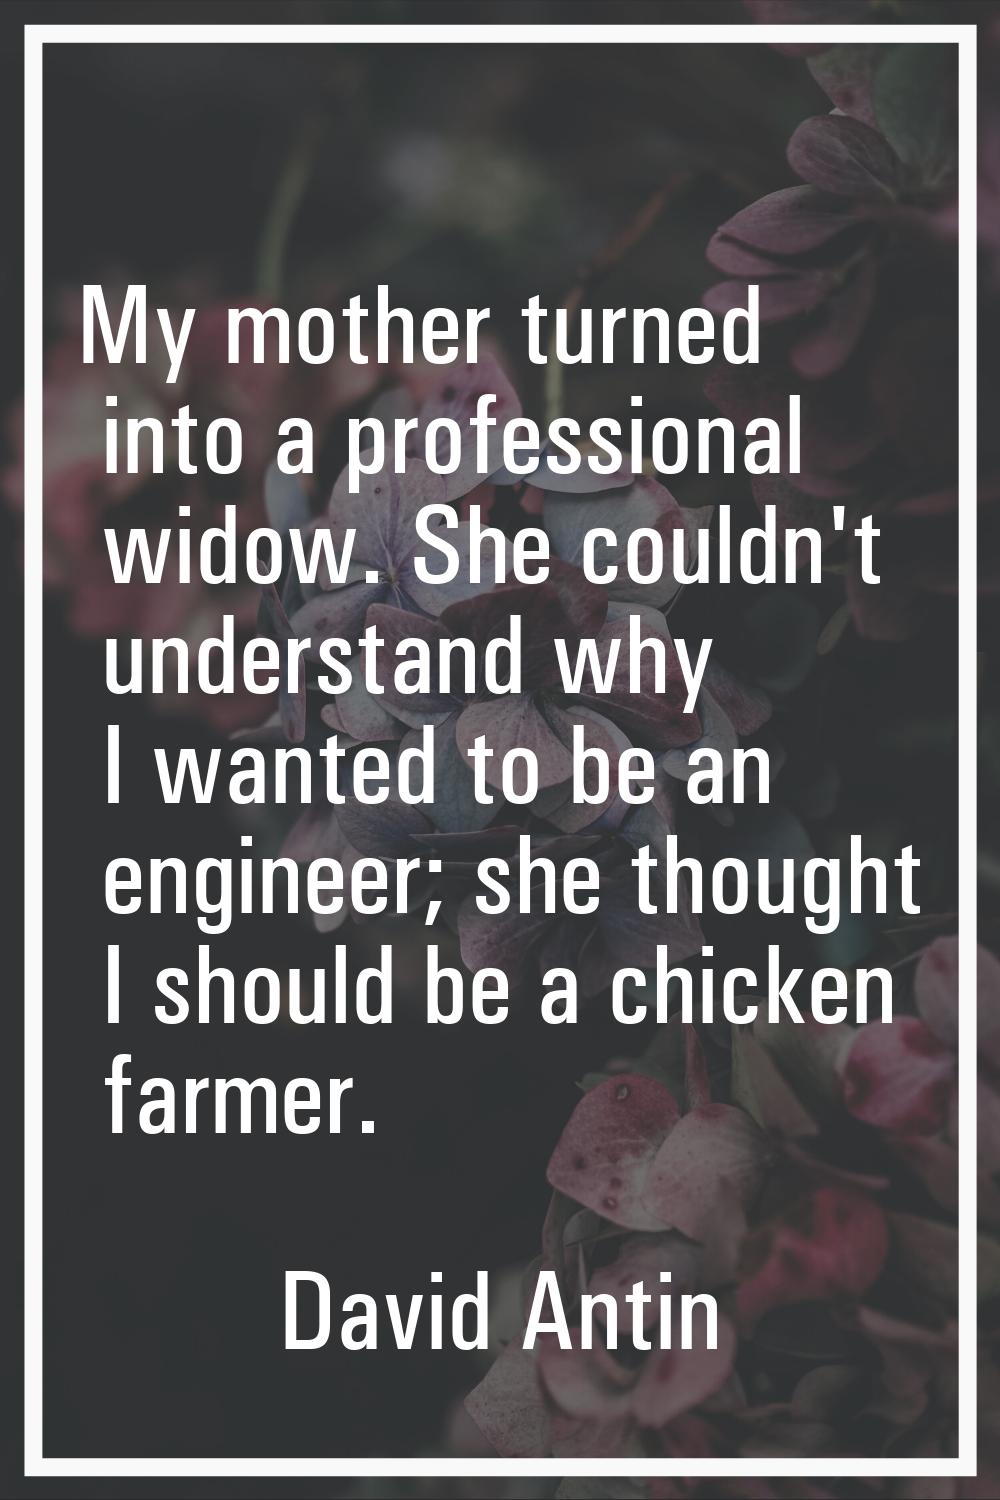 My mother turned into a professional widow. She couldn't understand why I wanted to be an engineer;